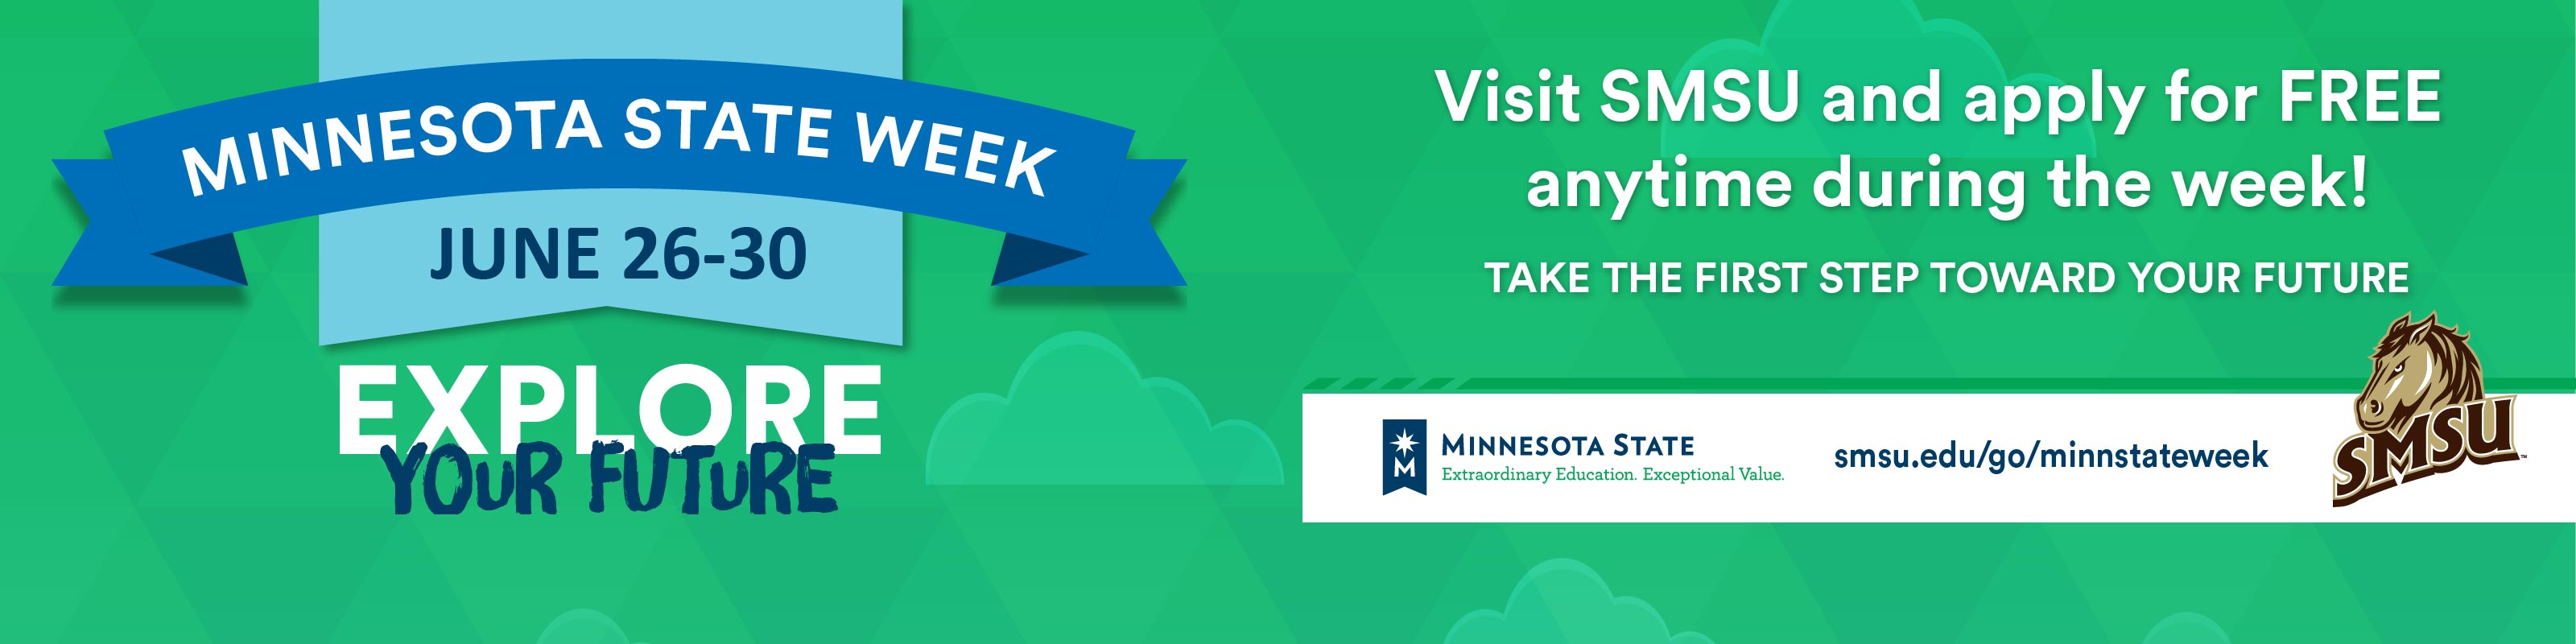 Minnesota State Week, June 26th through June 30th - Explore your future - Visit SMSU and apply for FREE anytime during the week! Take the first step toward your future.